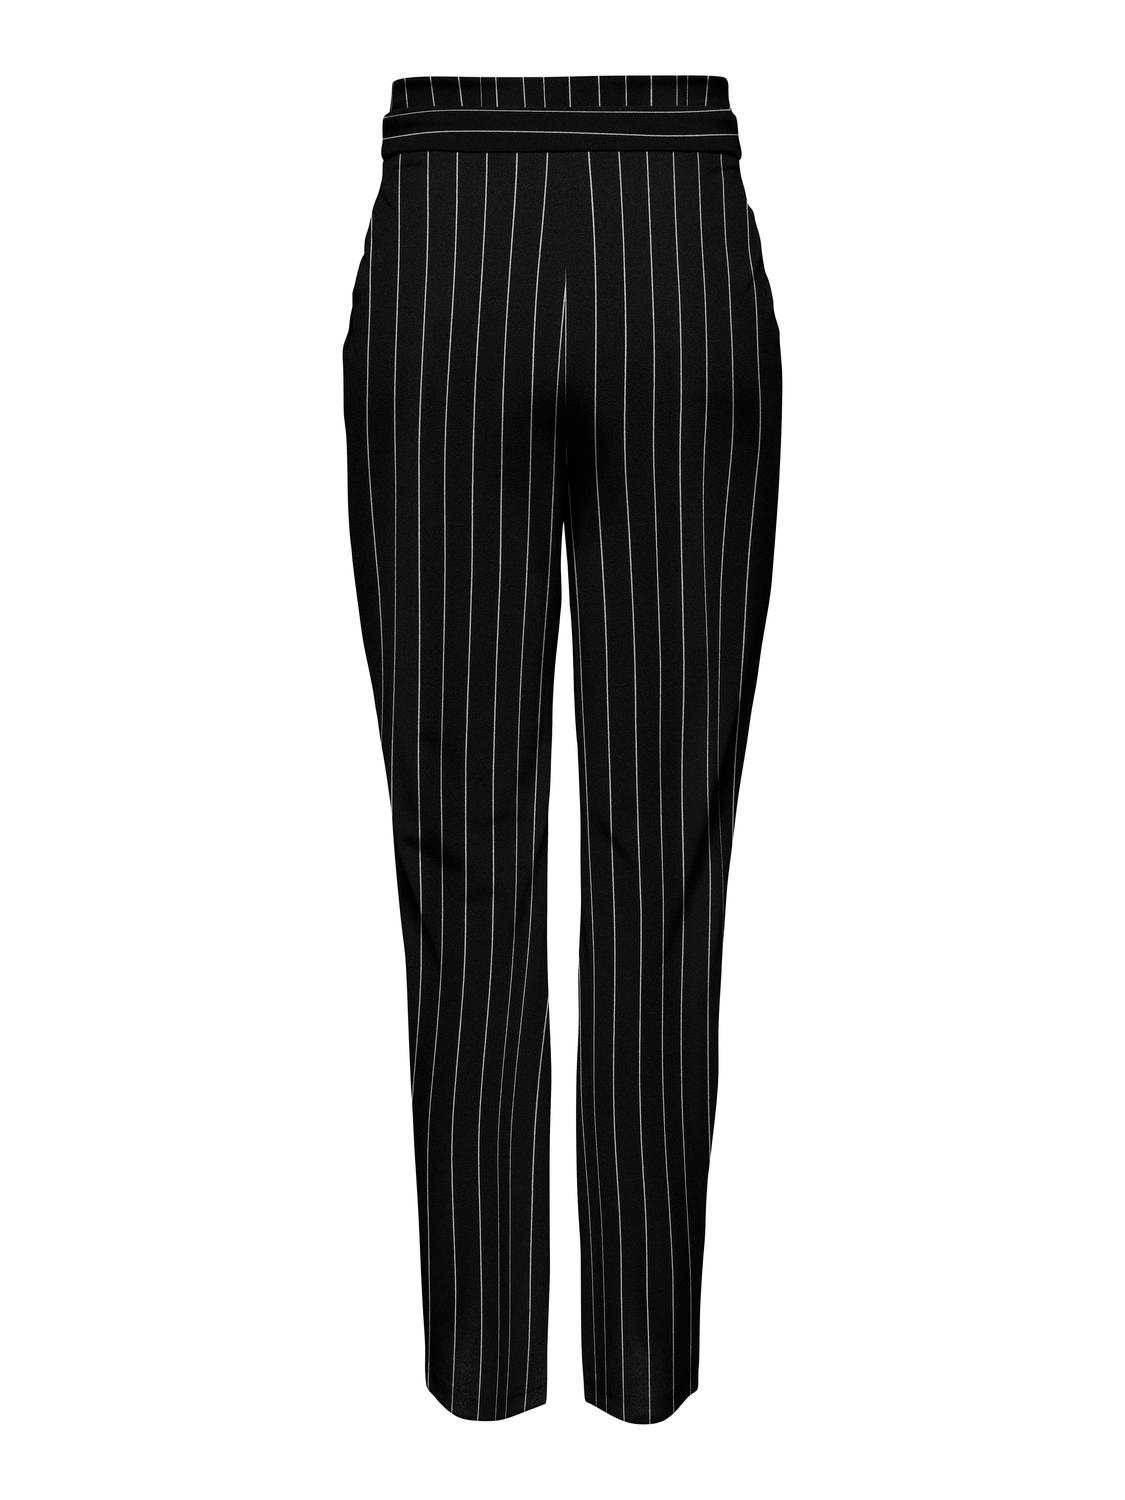 ONLY Classic Trousers -Black - 15205820